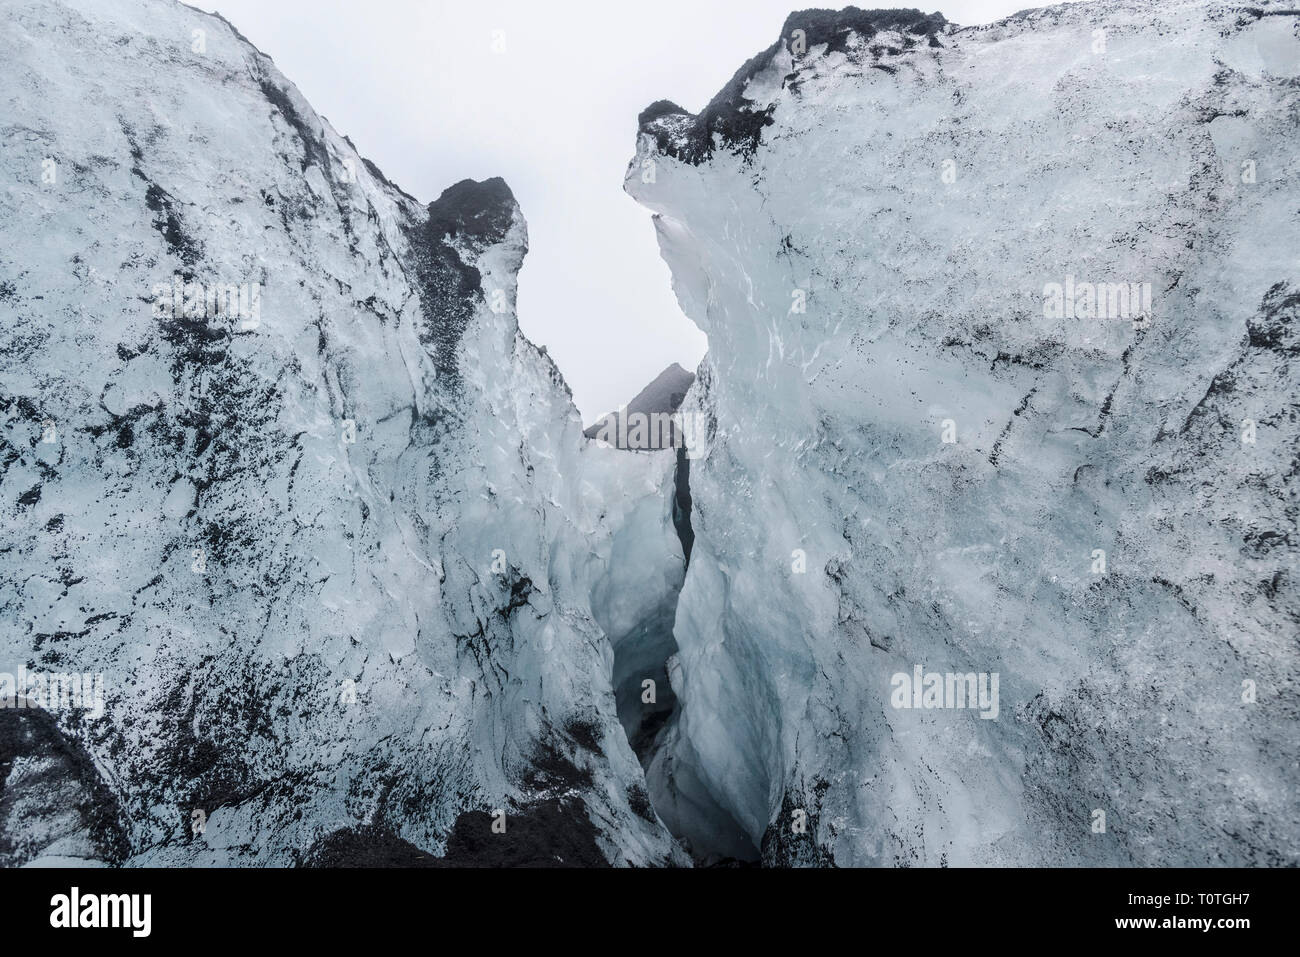 View of a Crevasse or Cavern formed in the ice on Sólheimajökull Glacier, Iceland Stock Photo